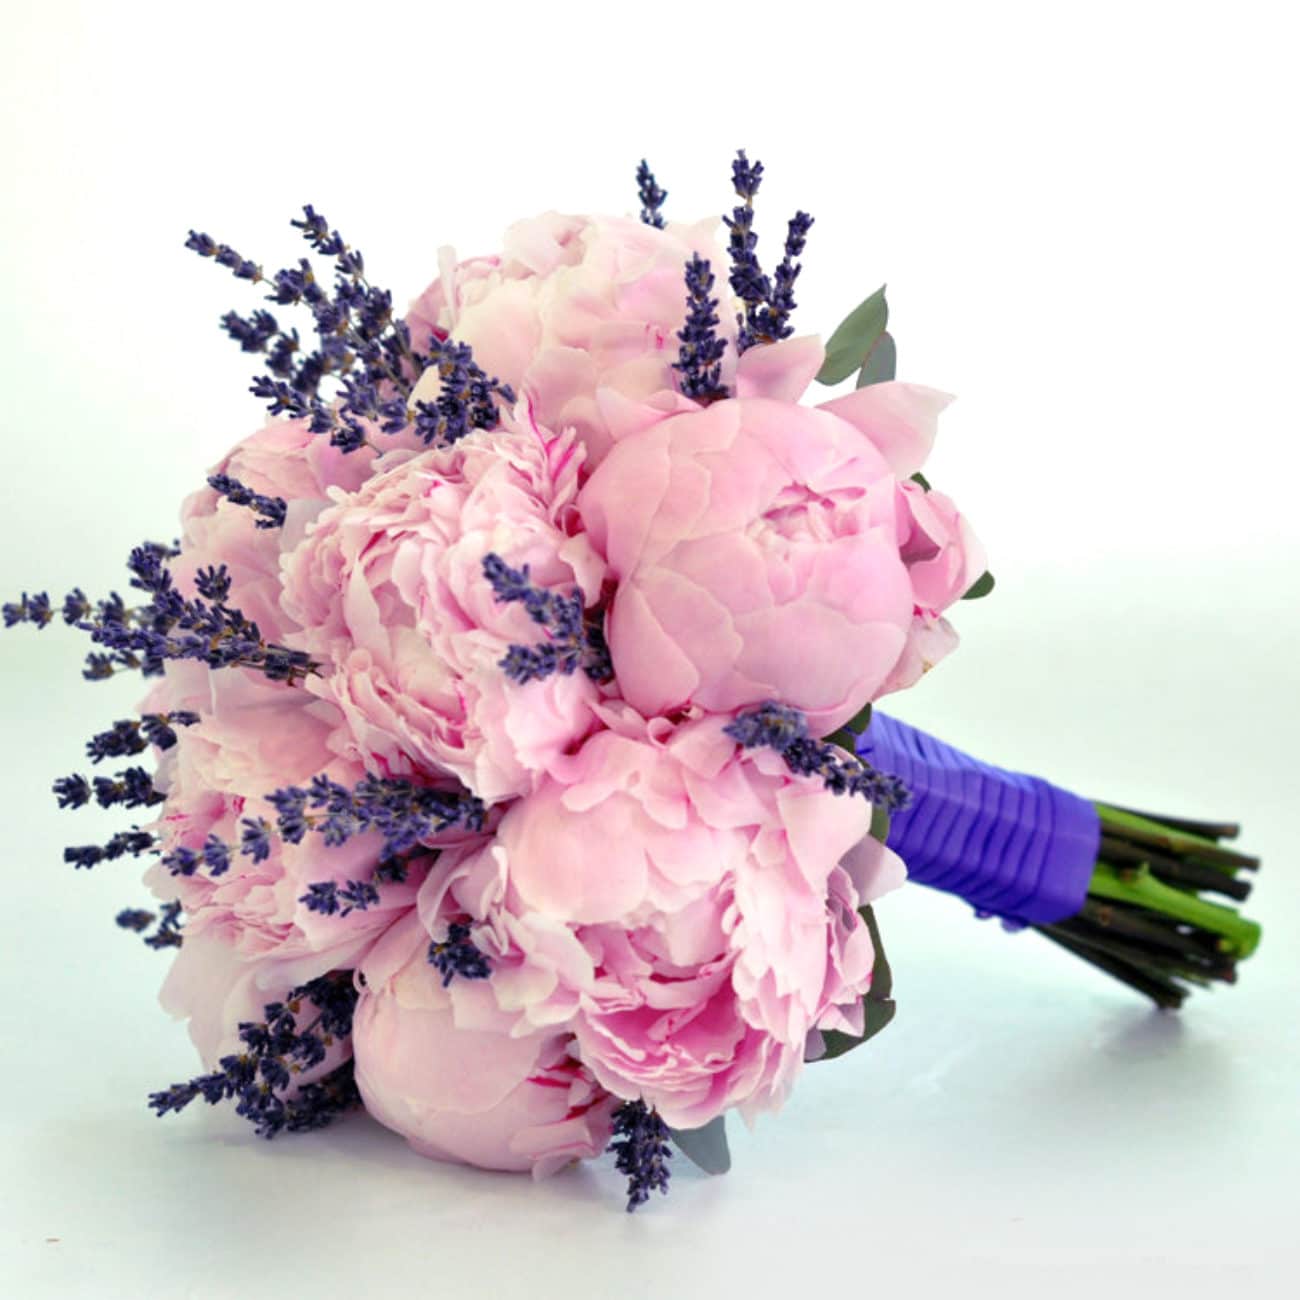 Peonies with Lavender